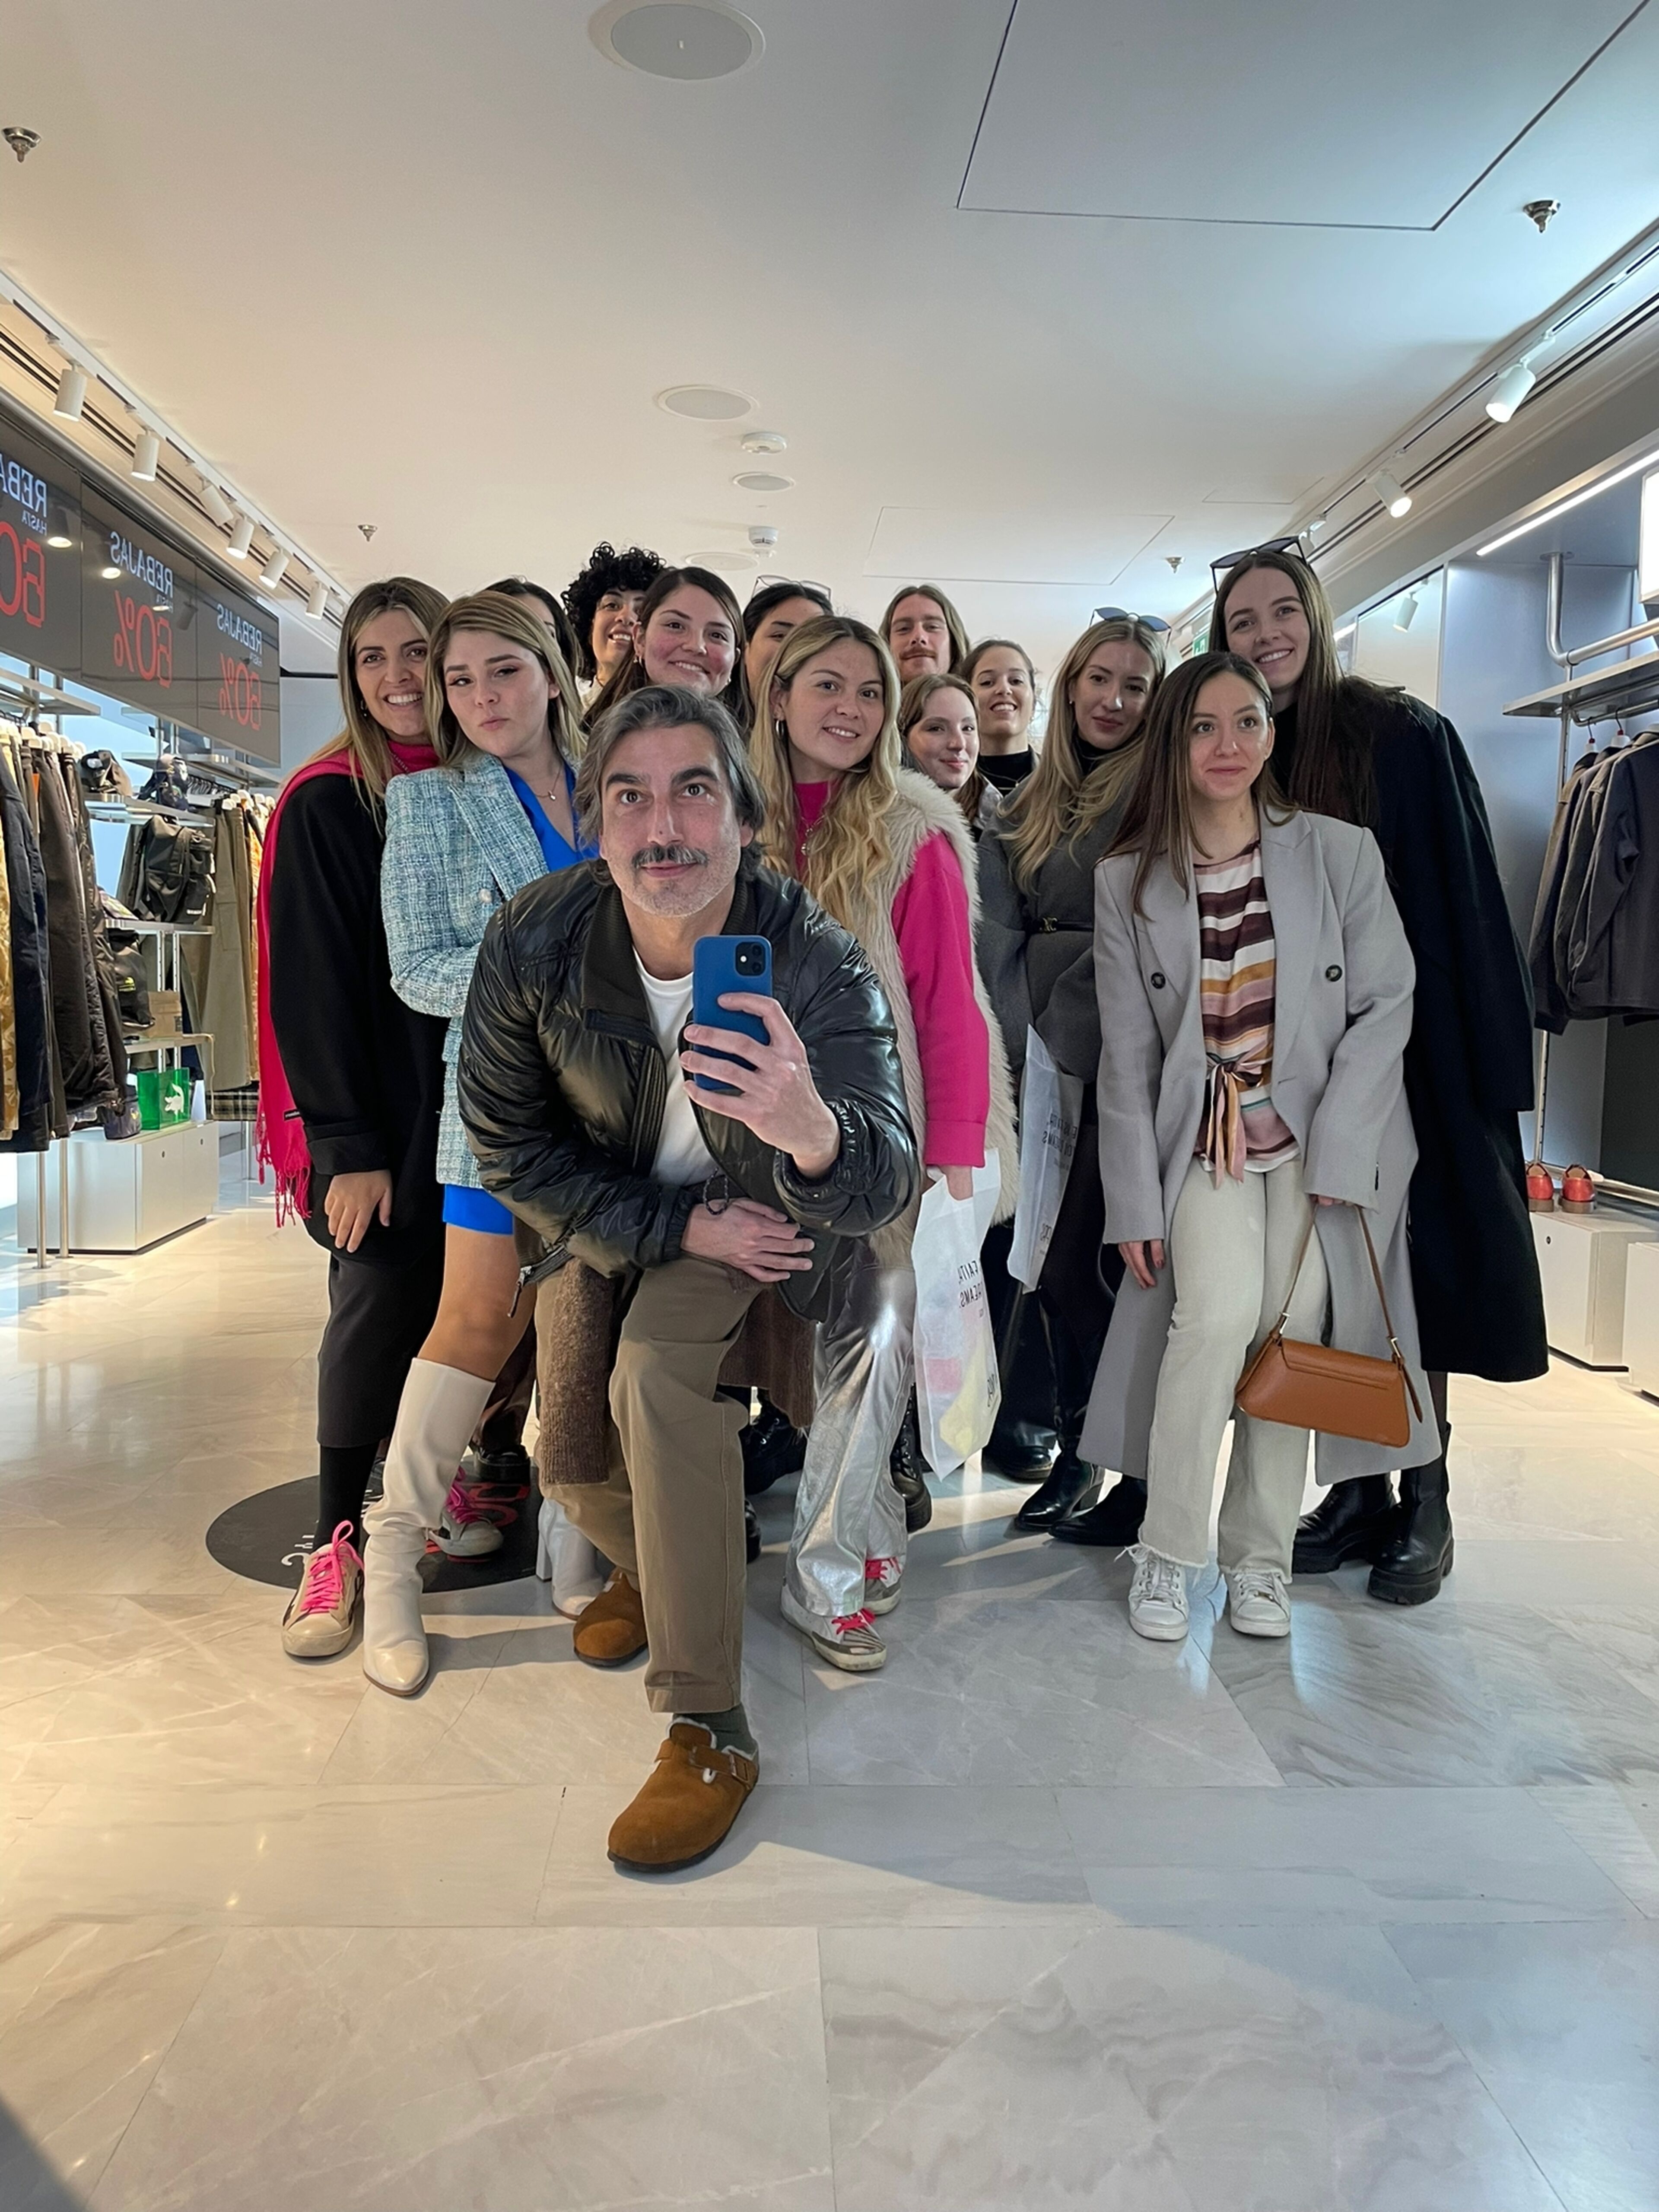 A cheerful group of people posing for a mirror selfie in a clothing store, with a man in the forefront holding the phone.